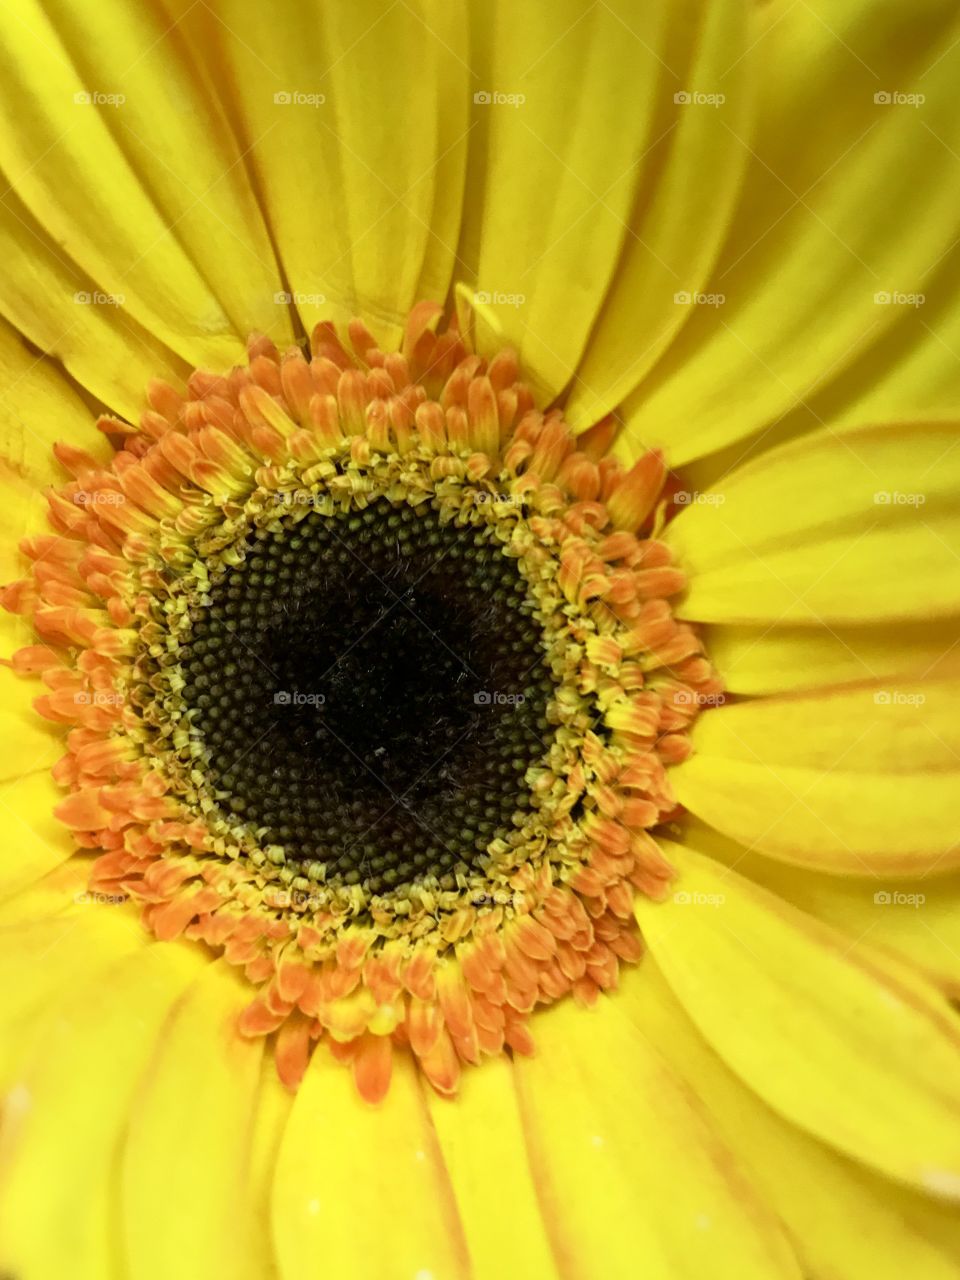 Sunflower...ready for my close-up